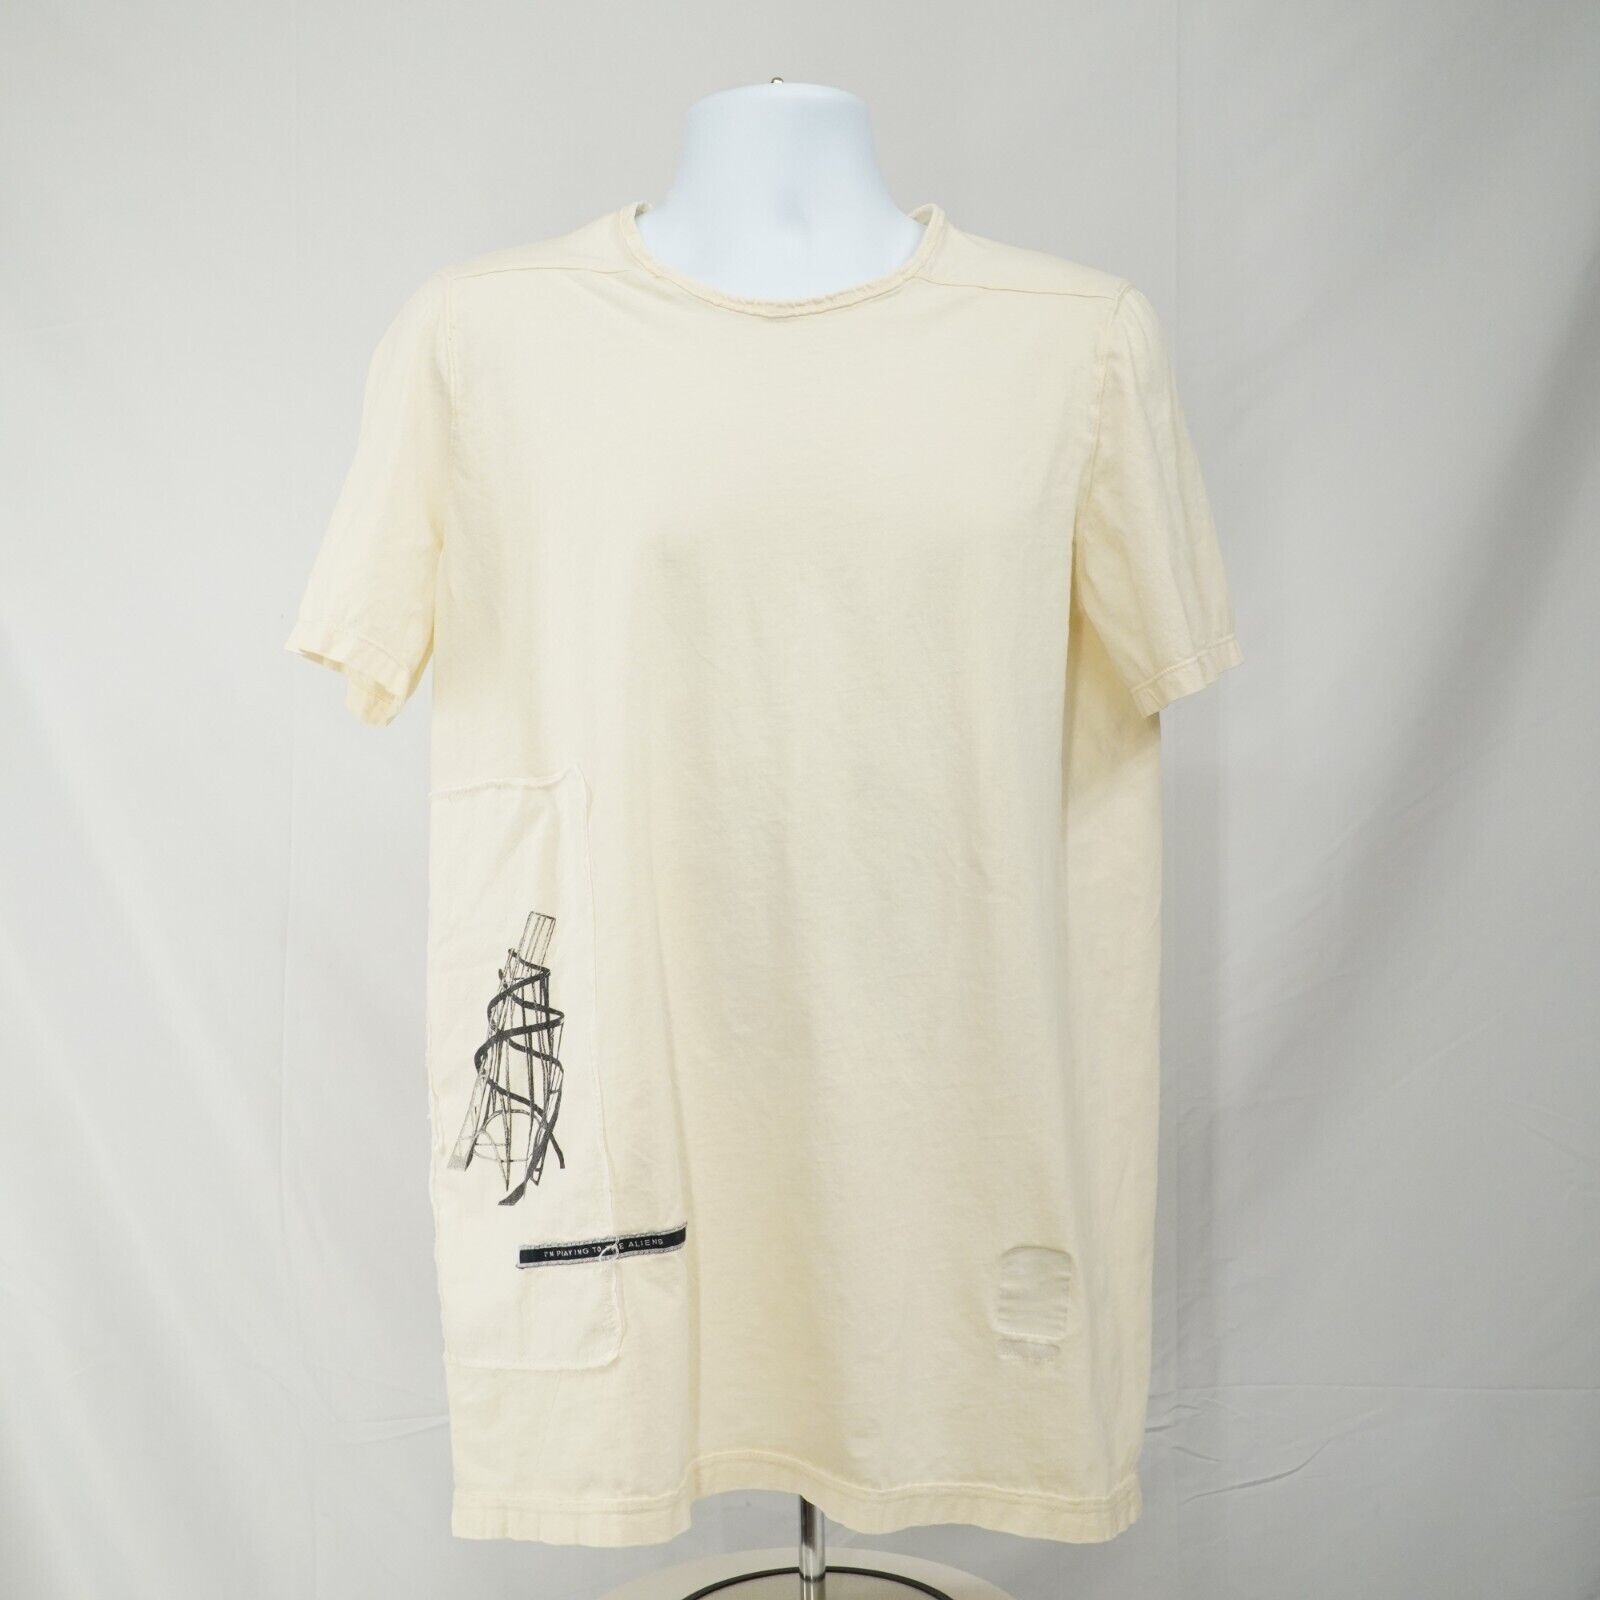 DRKSDHW Patched Level Tee Milk White Cotton - Lar - 2